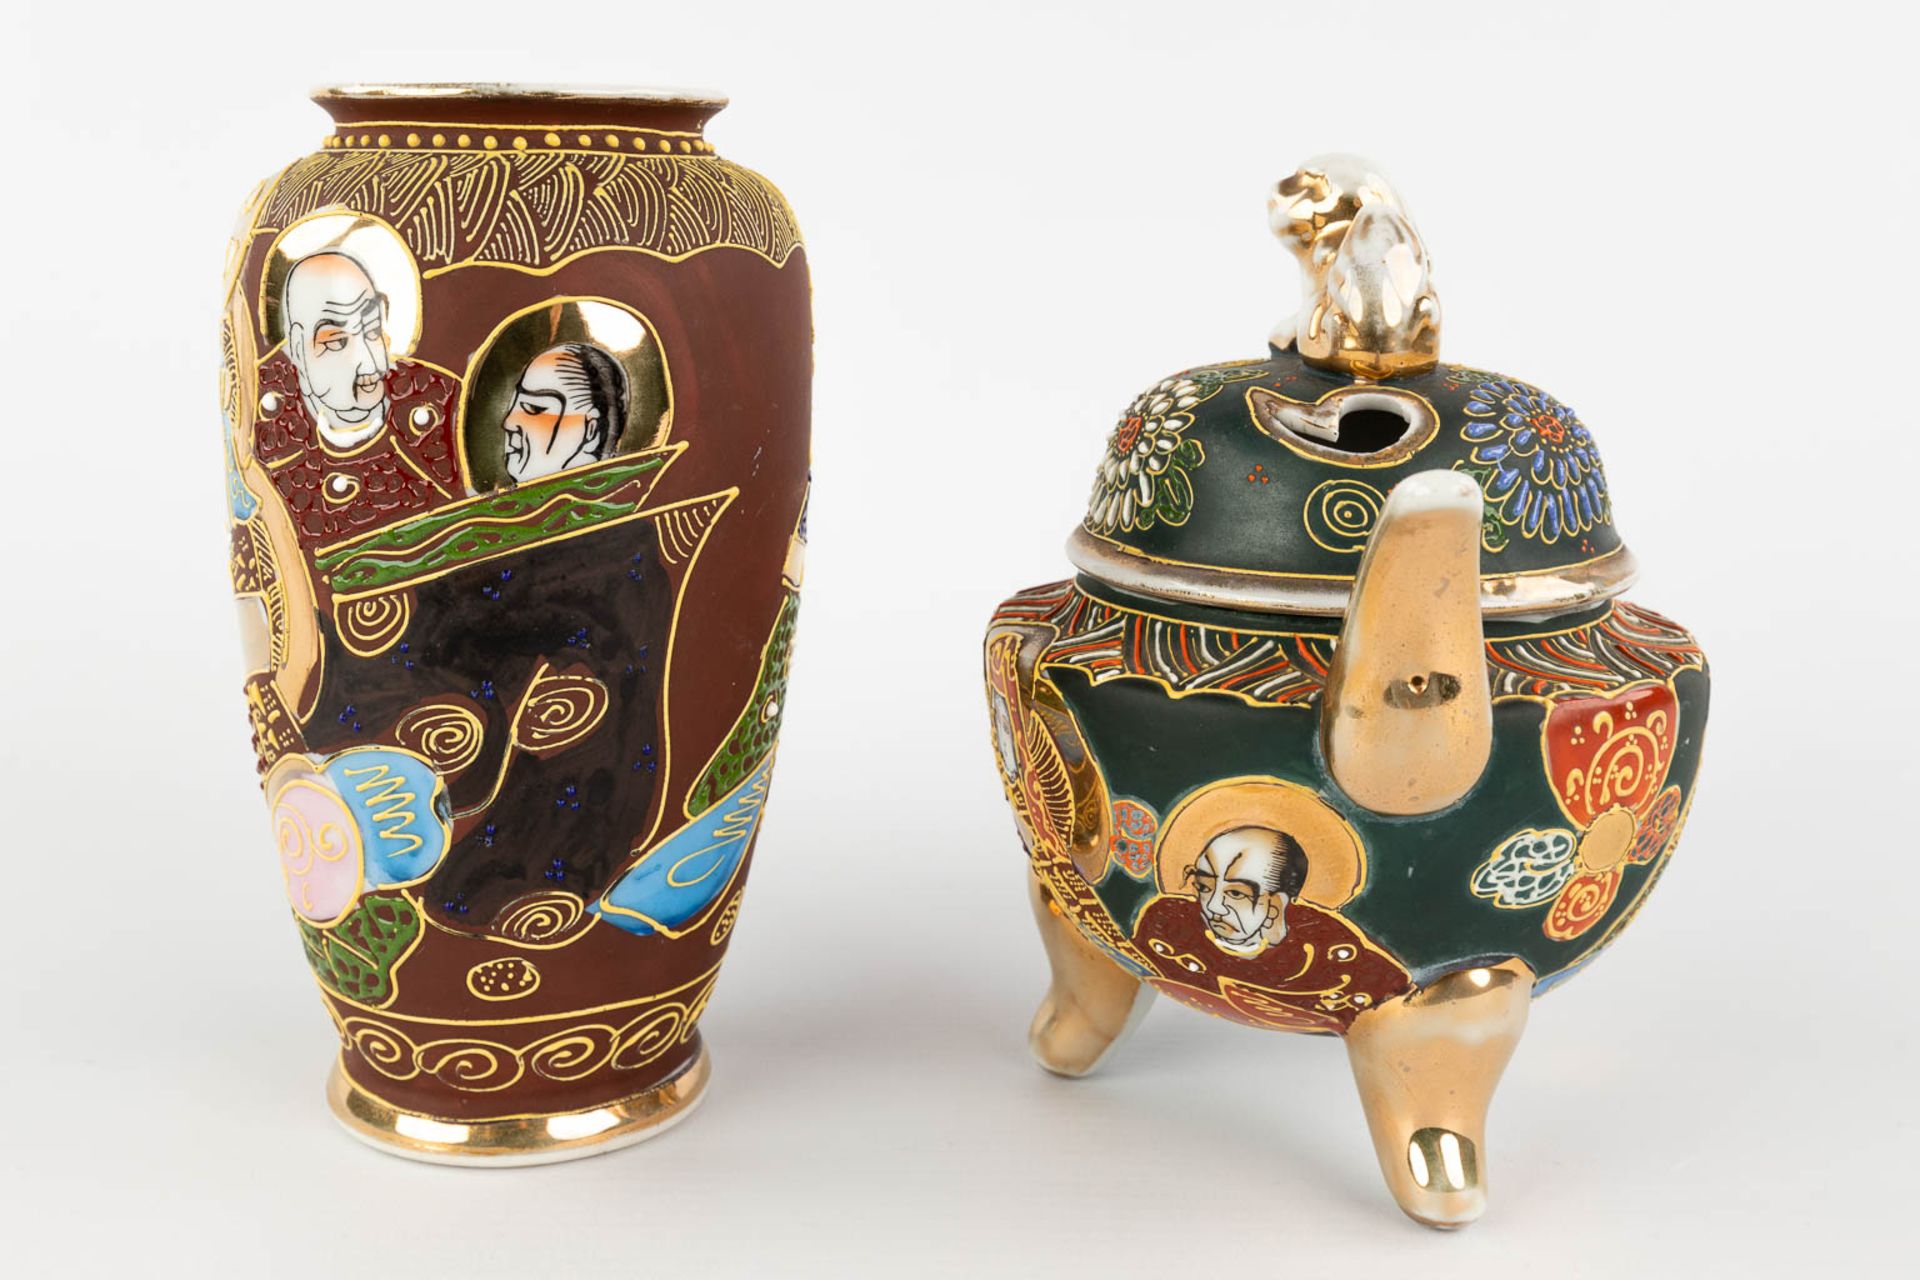 A pair of vases, a vase and jar with lid, Satsuma faience, Japan. 20th C. (H:31 x D:19 cm) - Image 15 of 19